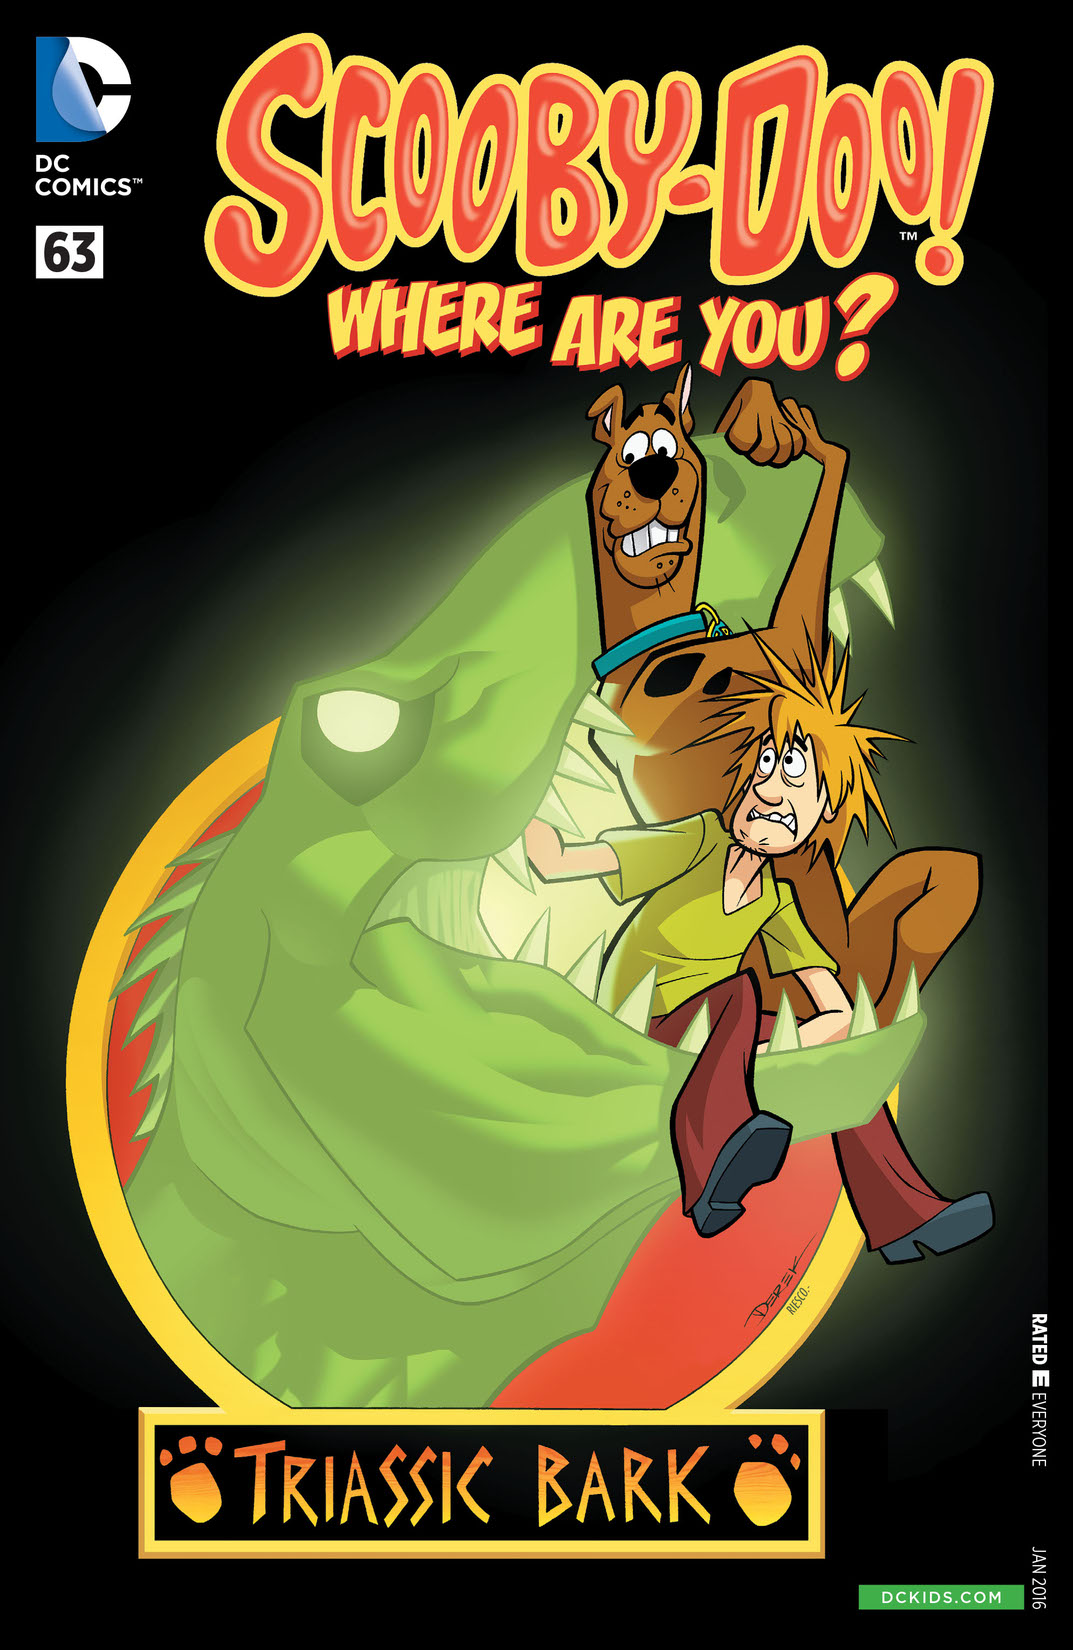 Scooby-Doo, Where Are You? #63 preview images